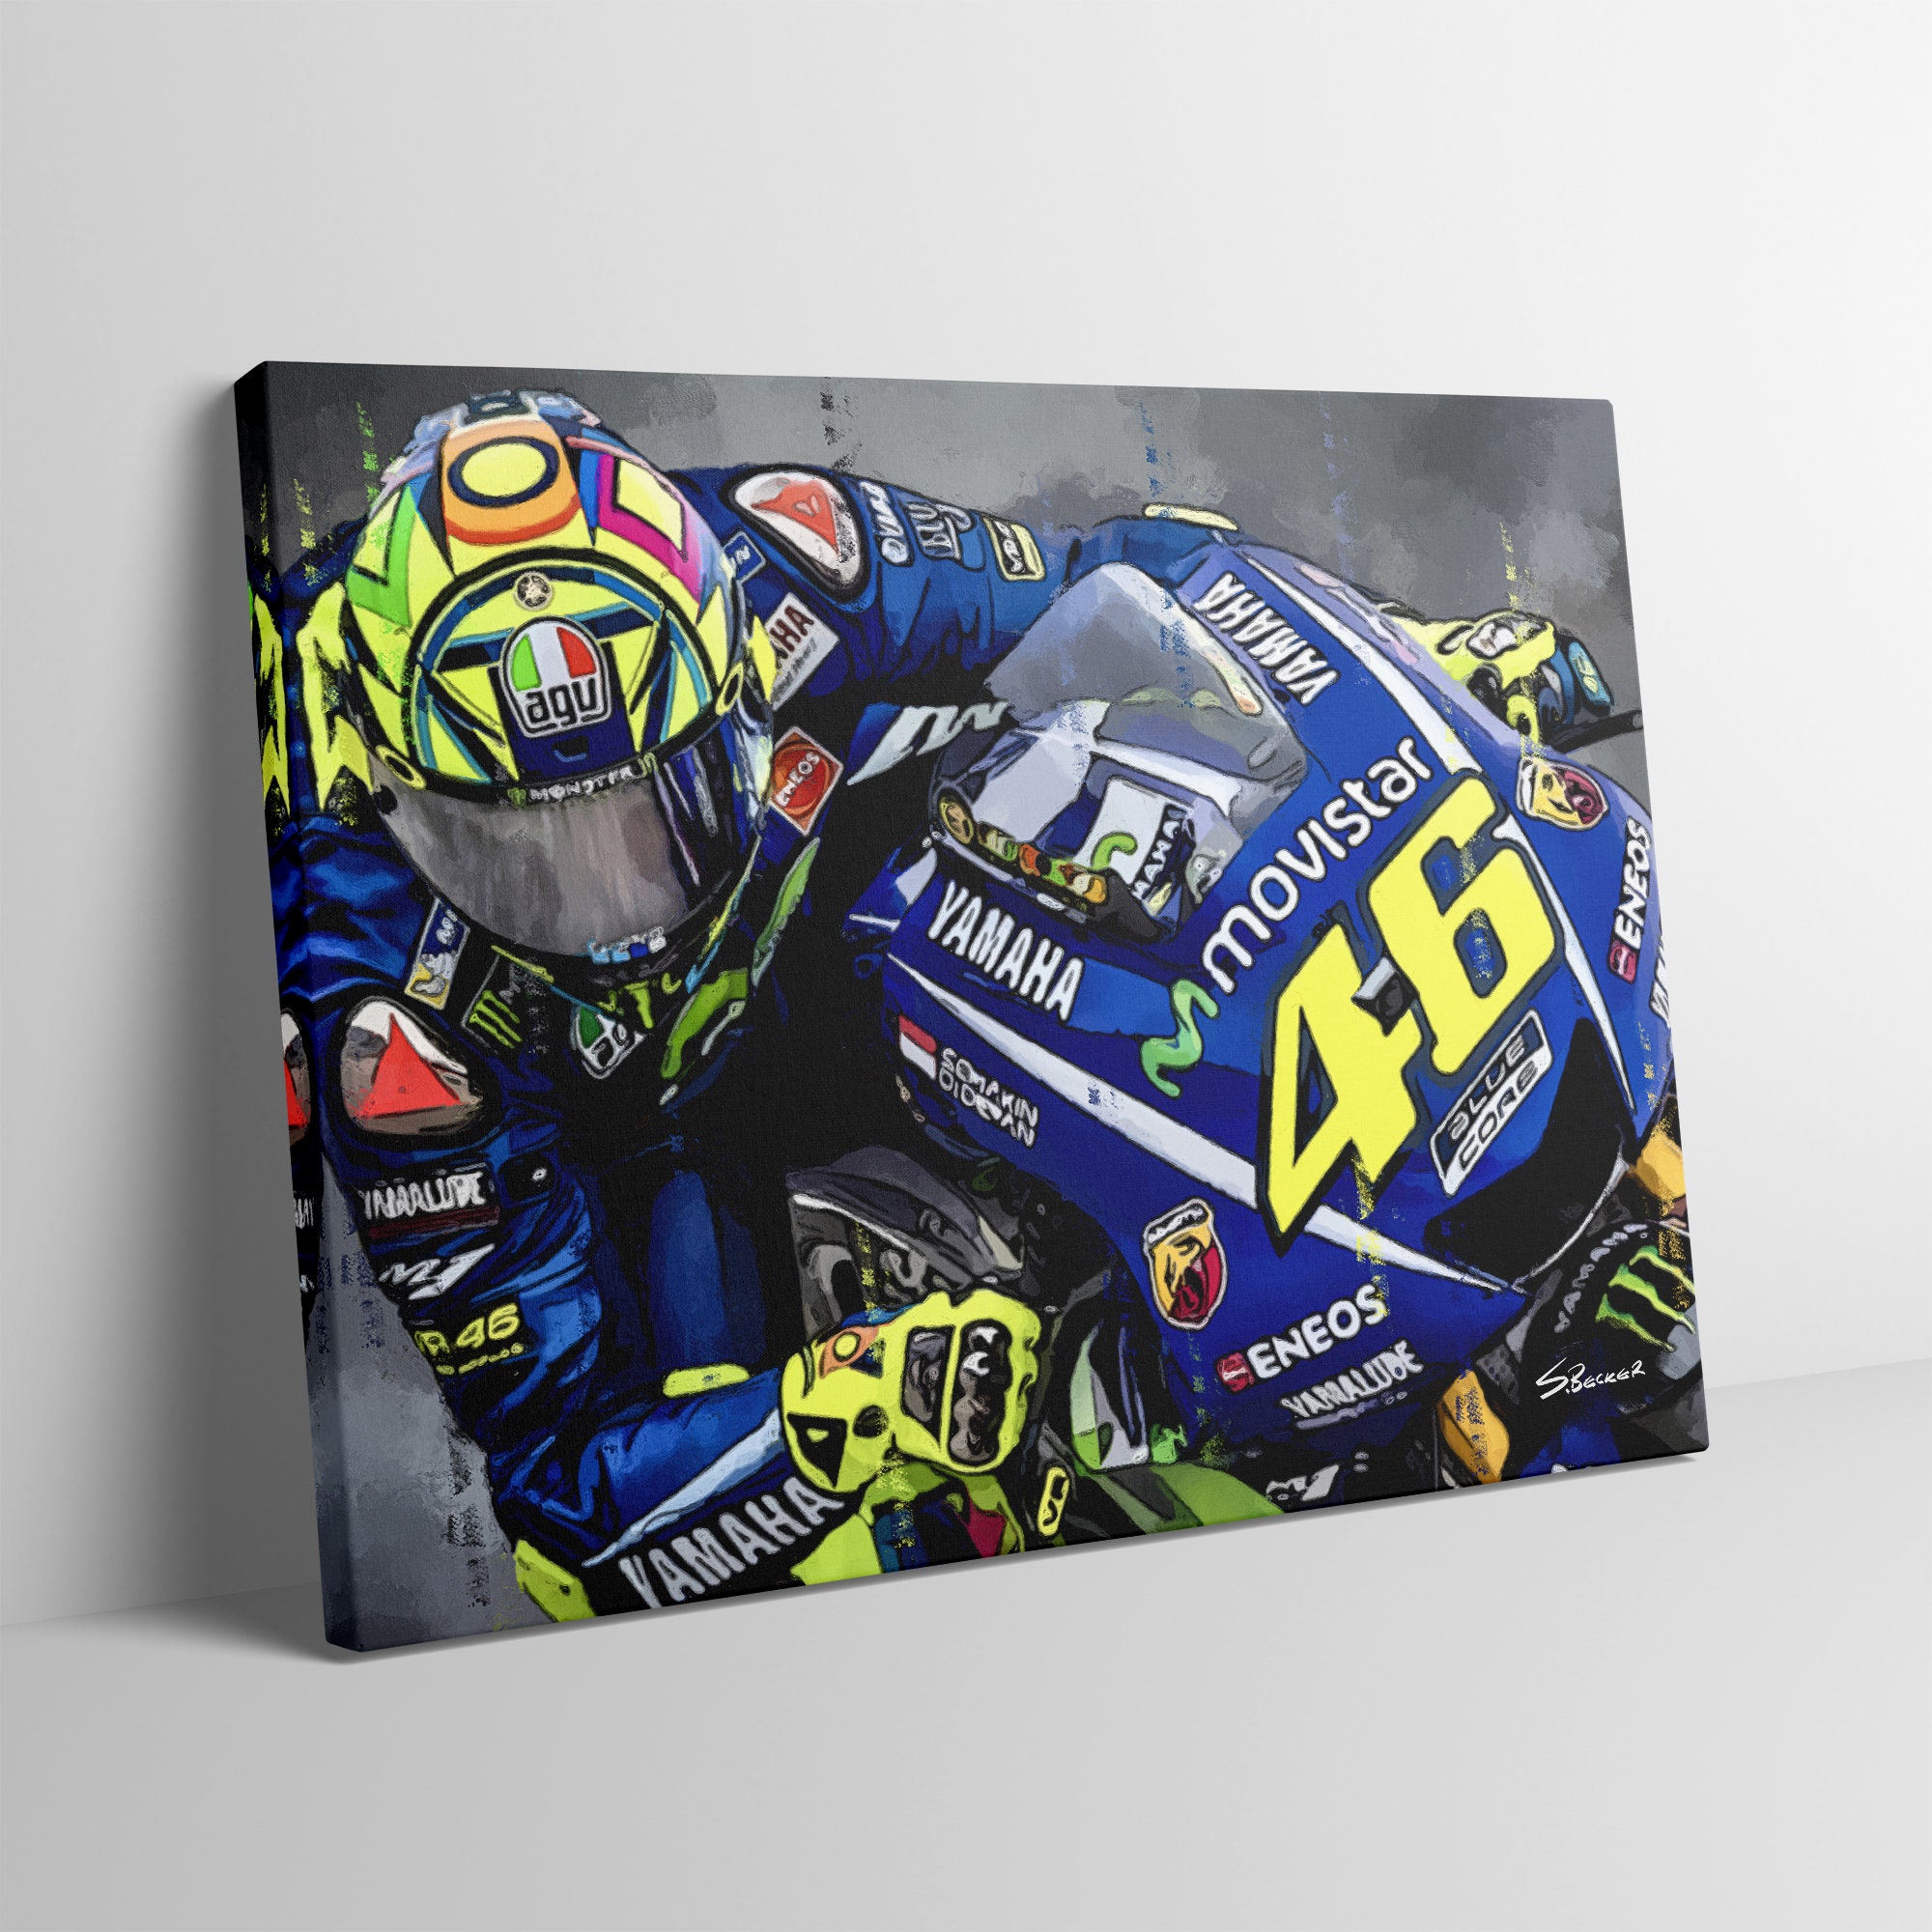 Valentino Rossi Rare Limited Edition Figurine Sculpture Only 1000 Made Moto  GP World Champion 125cc 250cc 500cc by LEGENDS FOREVER 